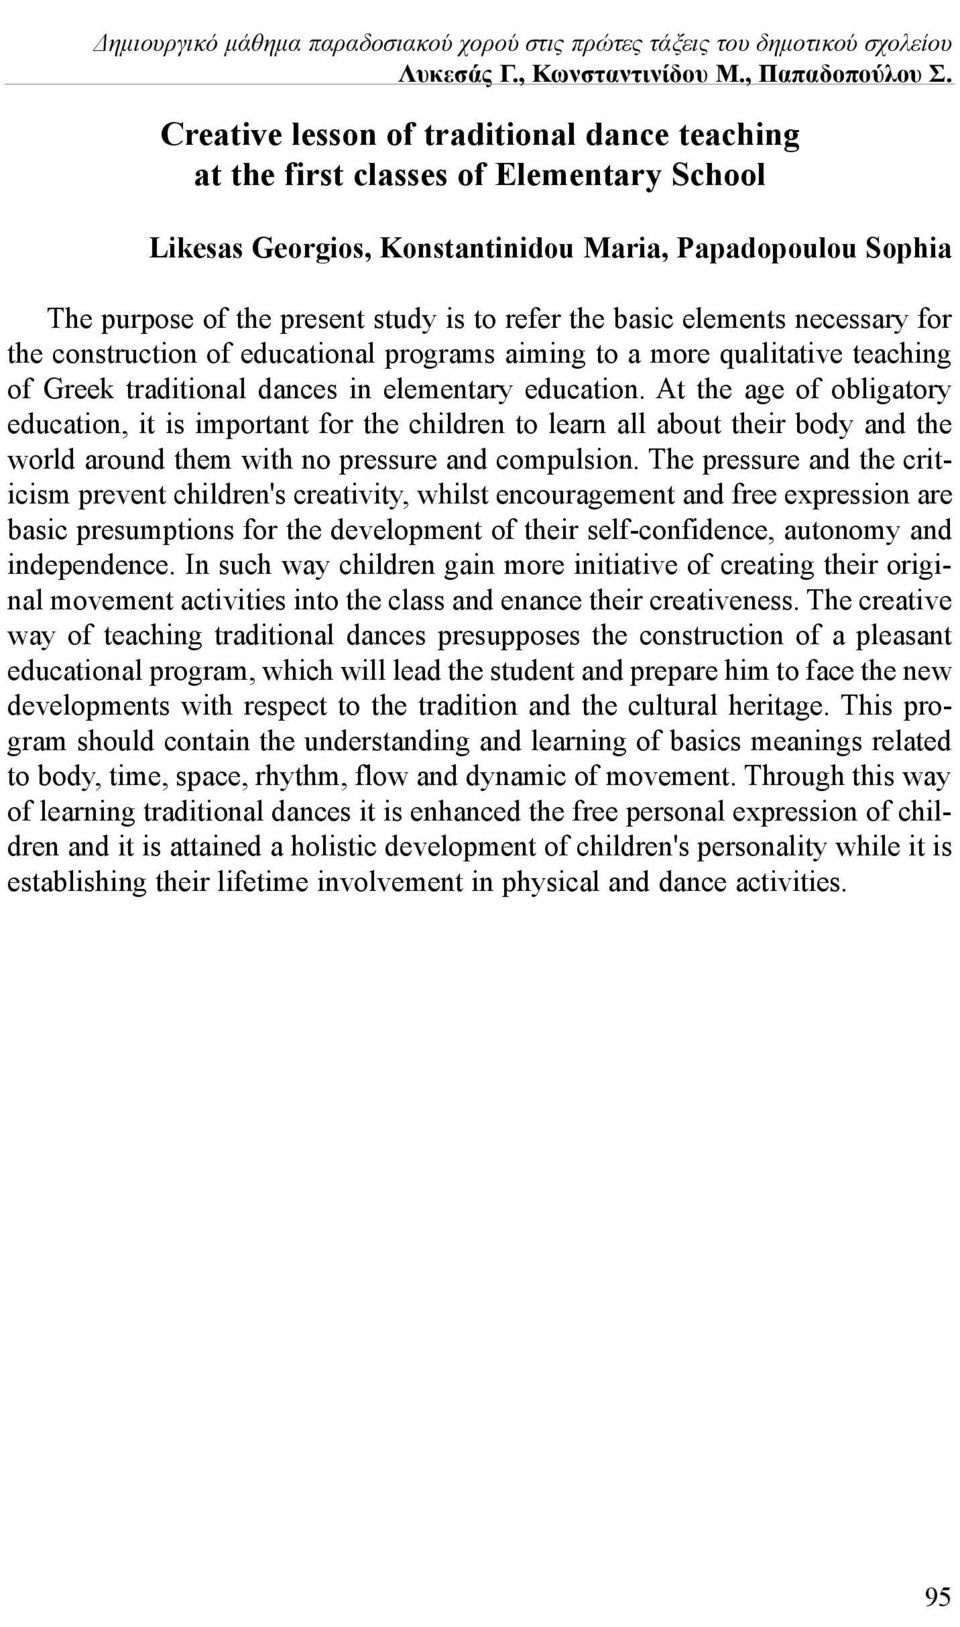 basic elements necessary for the construction of educational programs aiming to a more qualitative teaching of Greek traditional dances in elementary education.